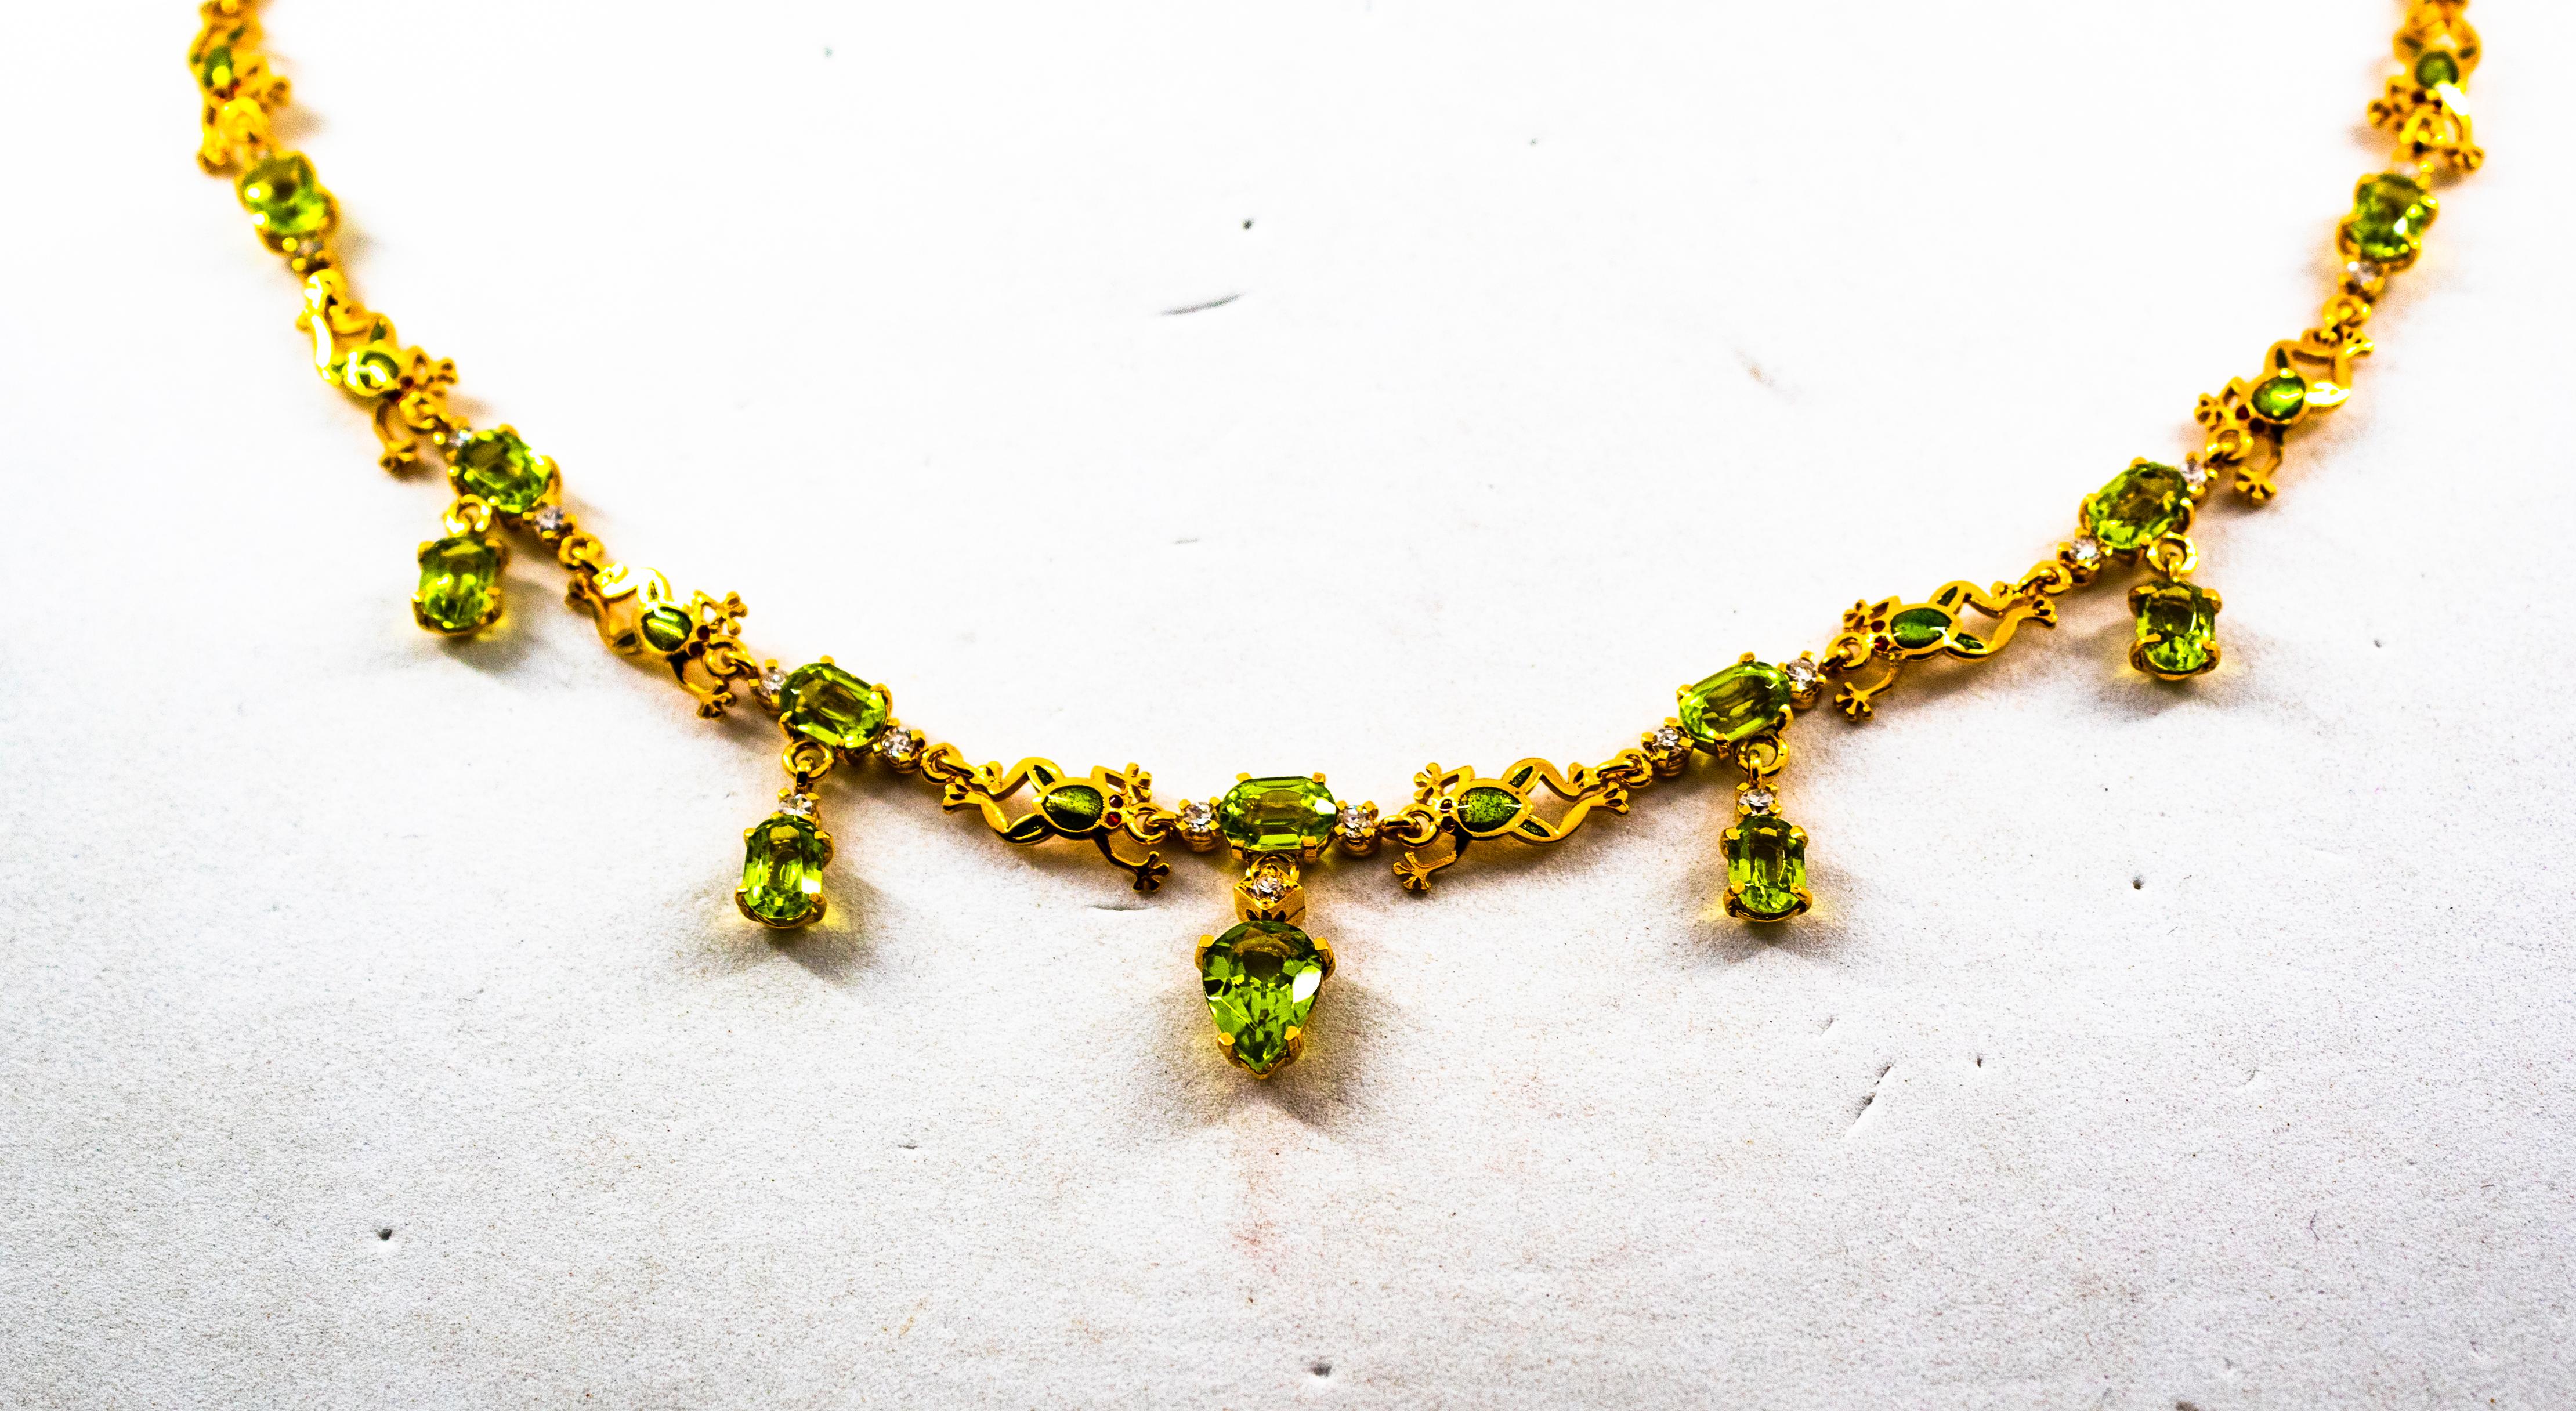 This Necklace is made of 9K Yellow Gold.
This Necklace has 0.99 Carats of White Brilliant Cut Diamonds.
This Necklace has 13.90 Carats of Peridots.
This Necklace has Green Enamel.

This Necklace is inspired by Art Deco.

This Necklace is available